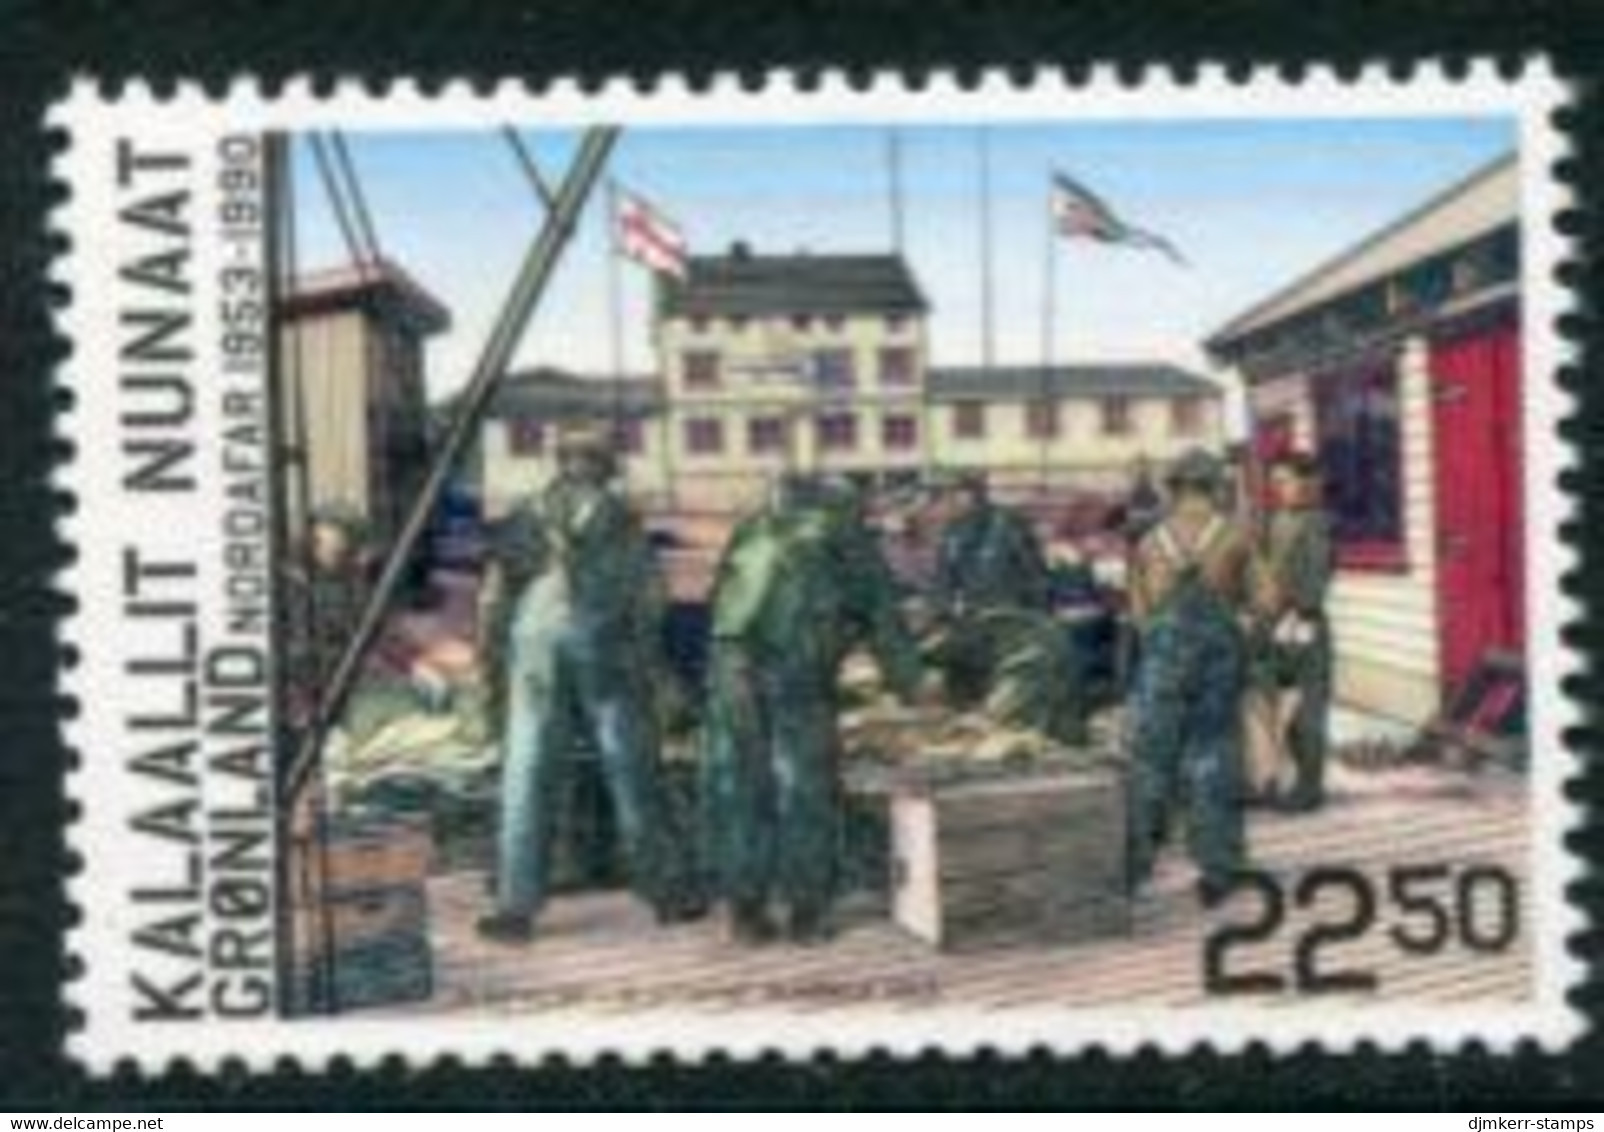 GREENLAND 2013 Nordafar Trading Station  MNH / **.  Michel 648 - Unused Stamps